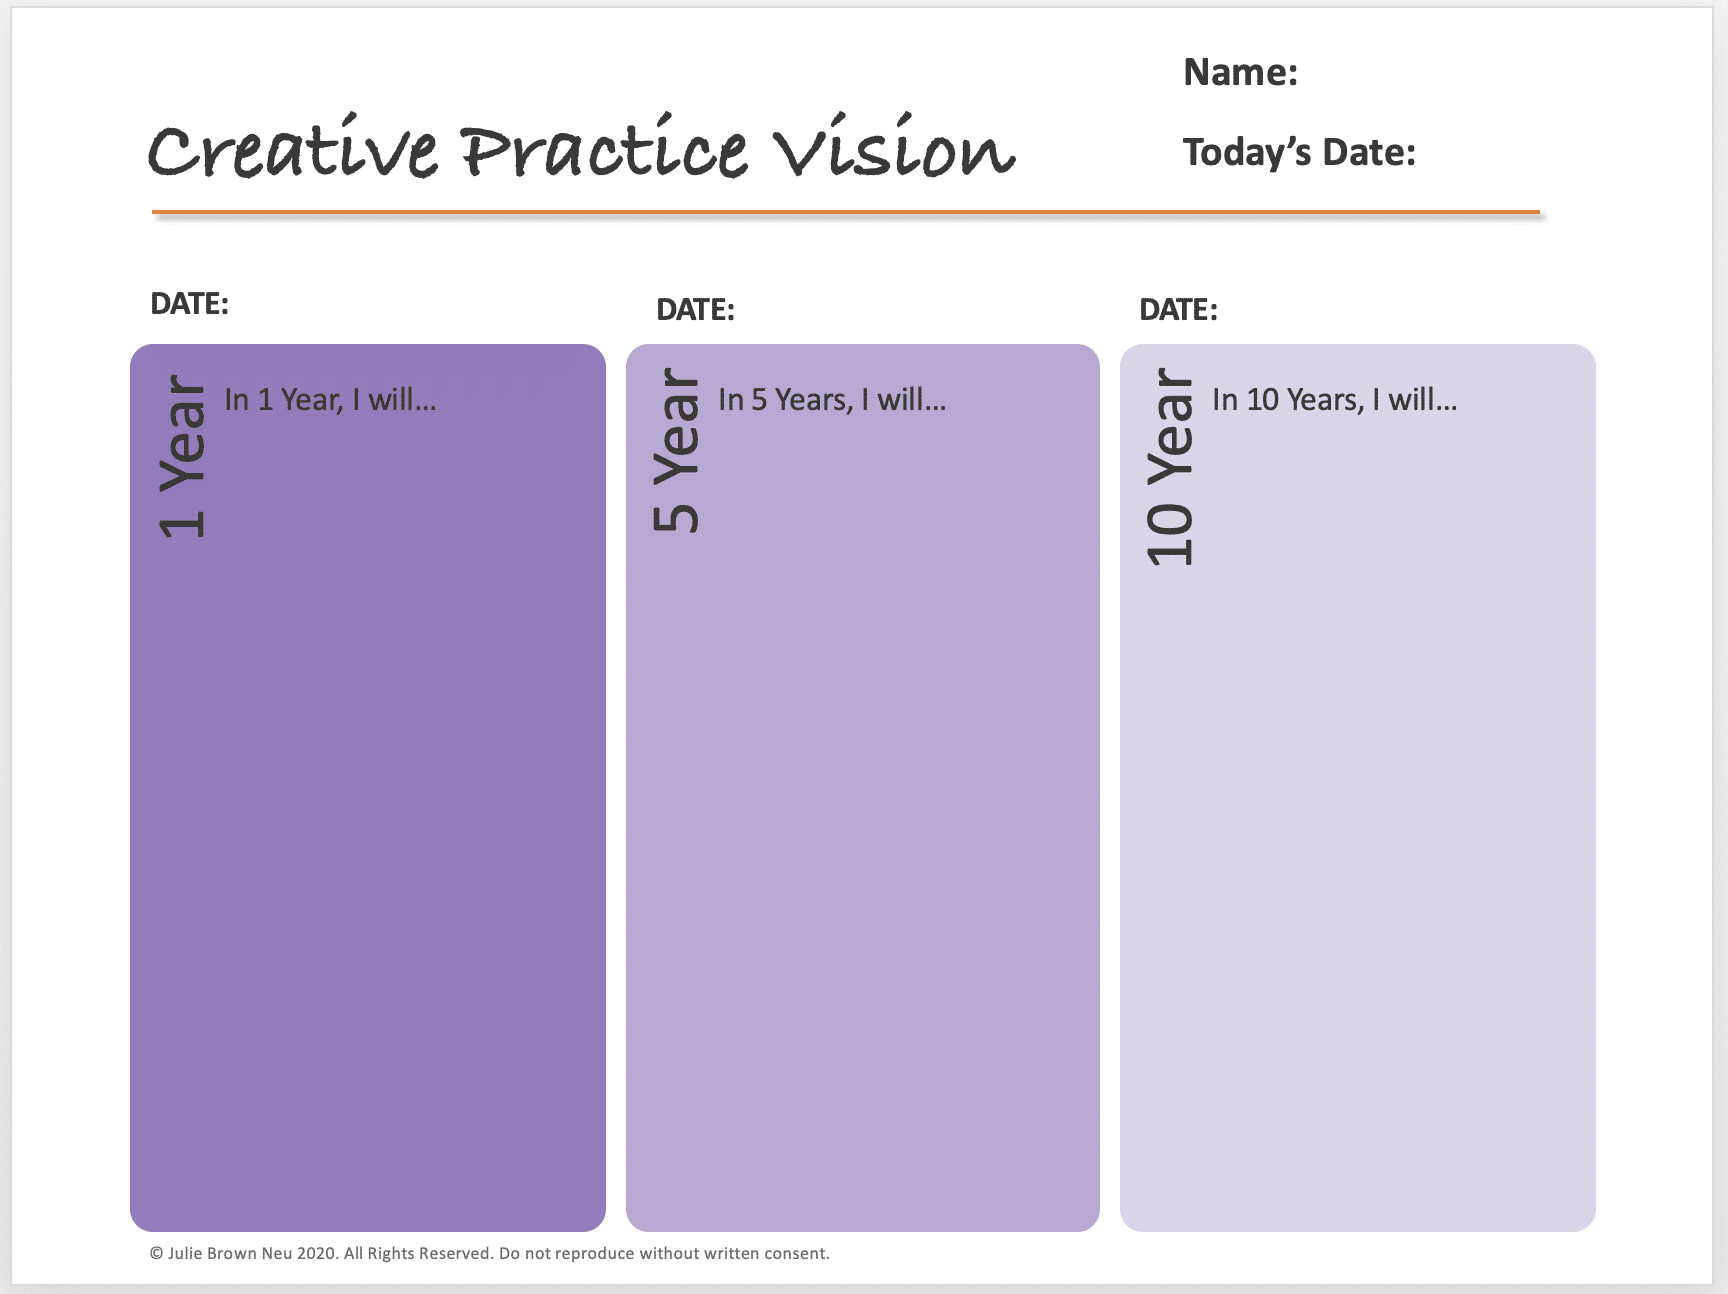 template for creating creative practice vision